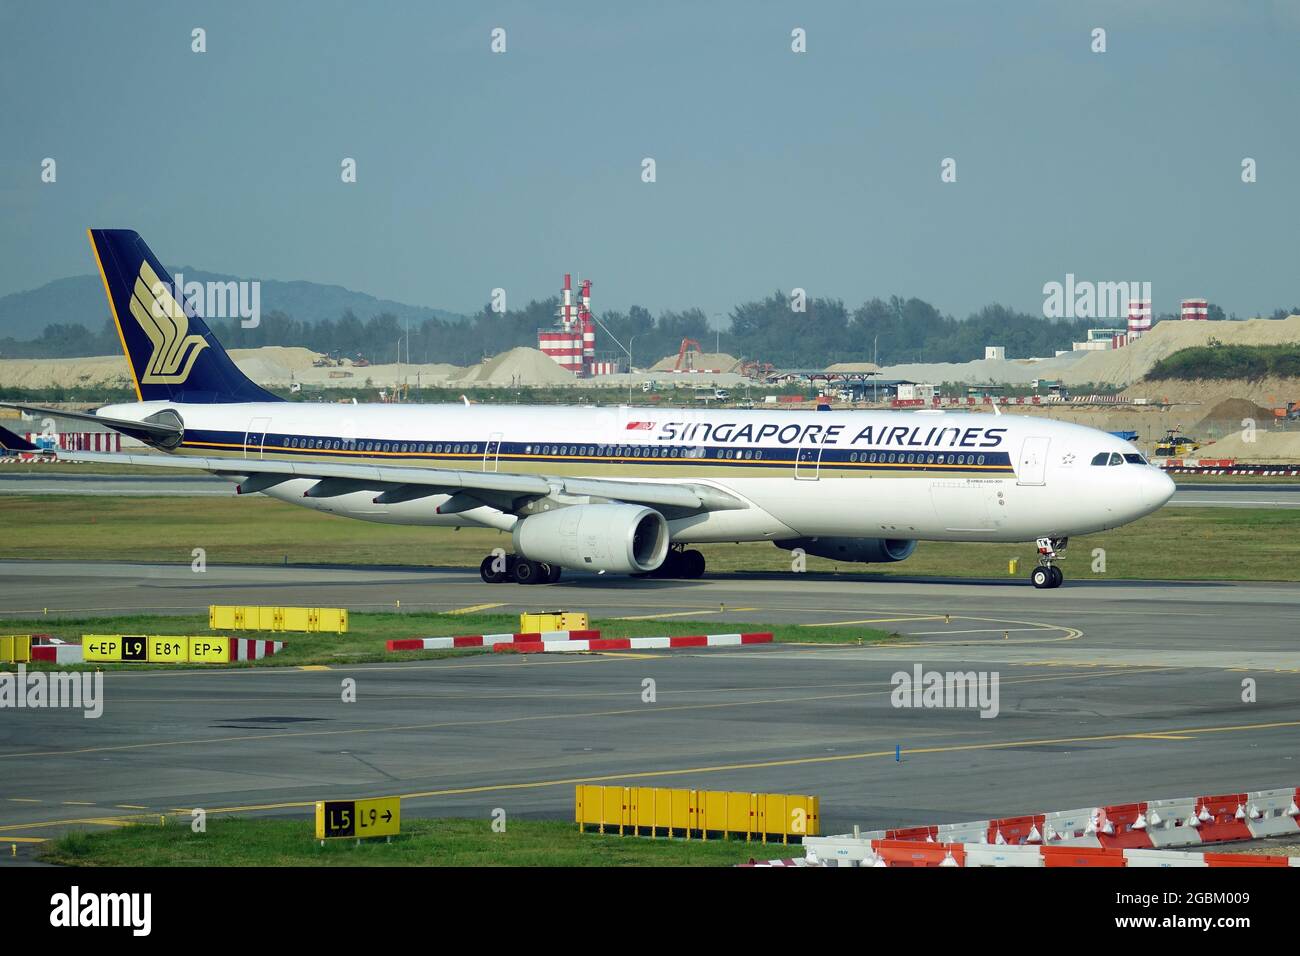 Singapore Airlines (is the flag carrier airline of Singapore), Airbus A330-300 airplane Stock Photo